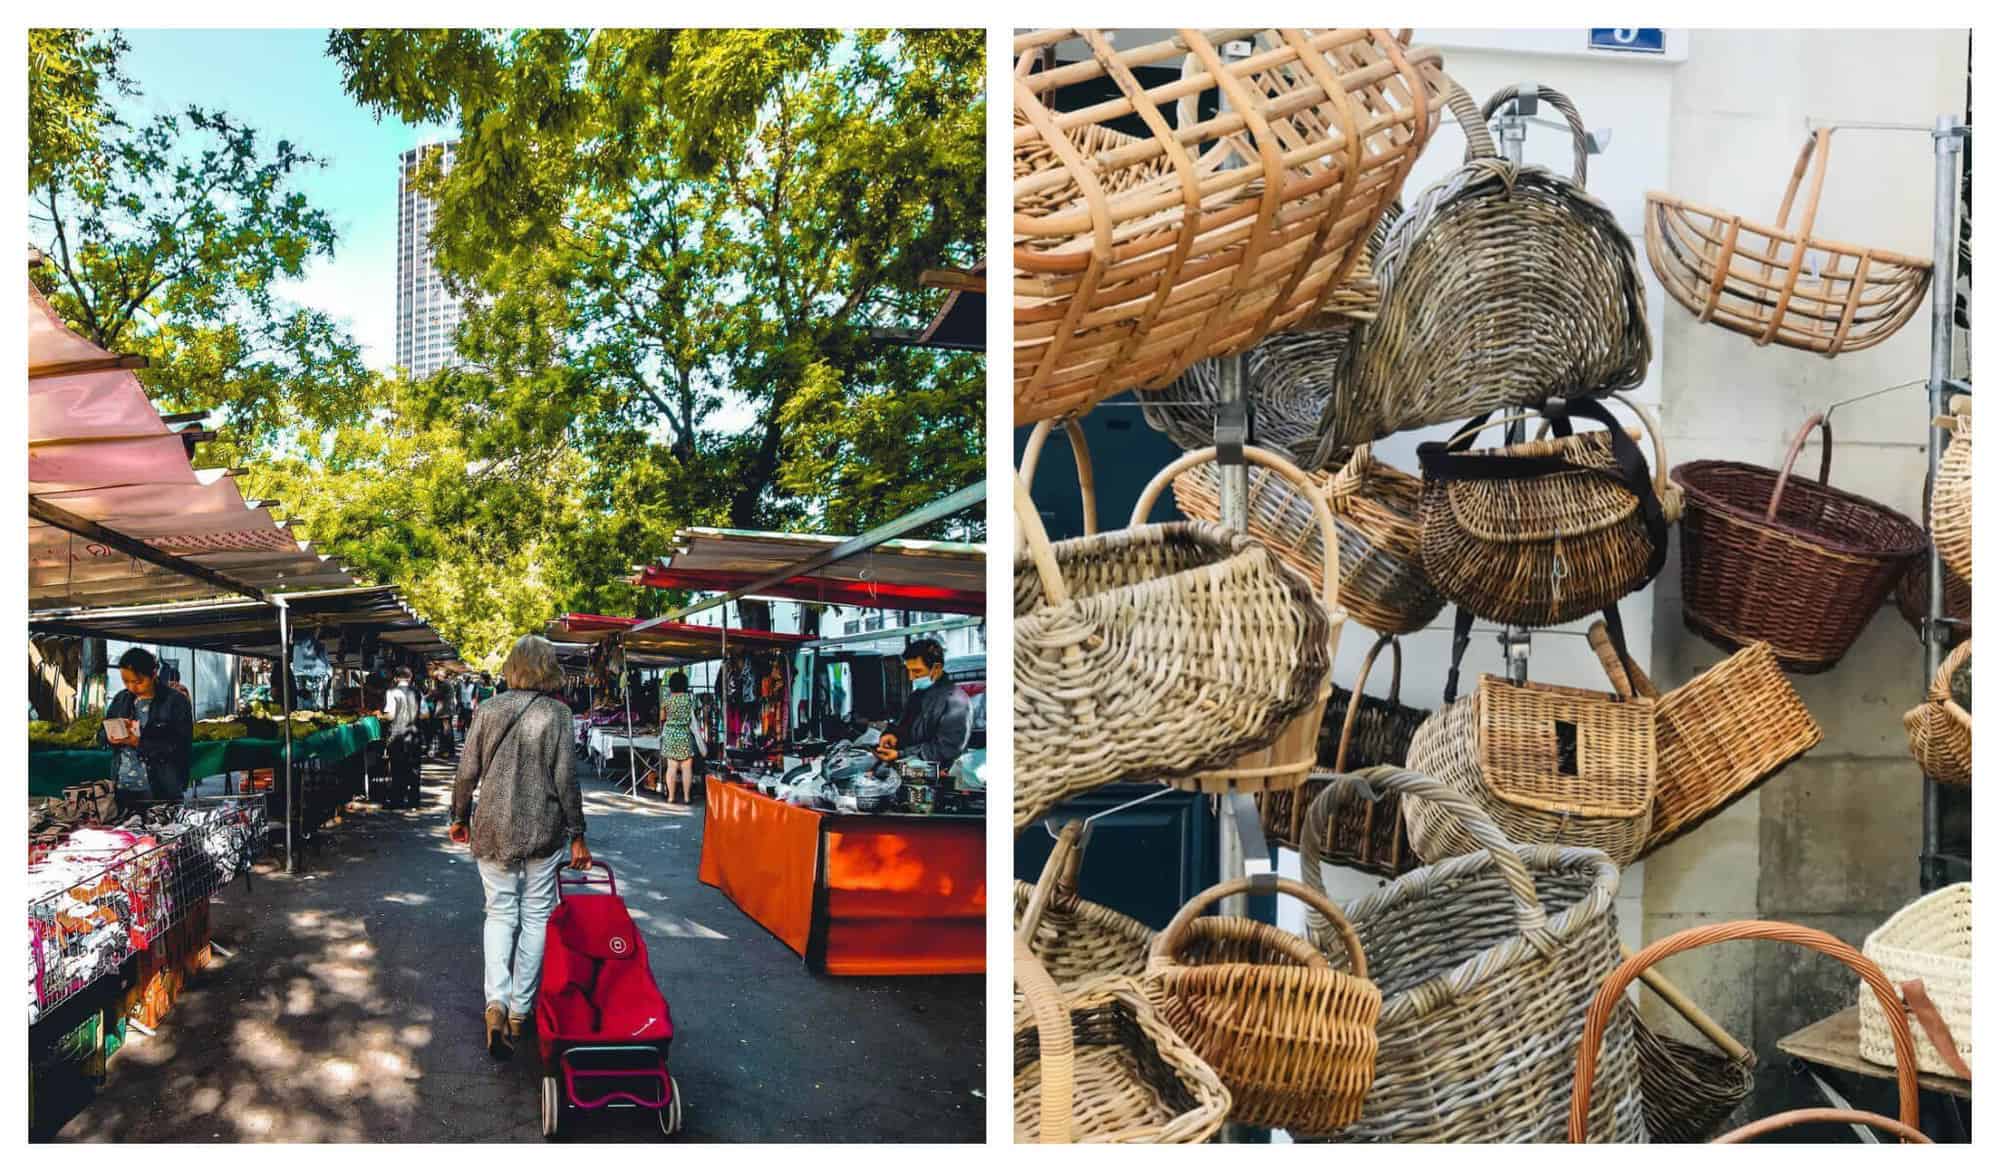 Left: A woman walks in a Parisian market with her red caddy. Right: Different types of woven baskets on display at a Parisian market.